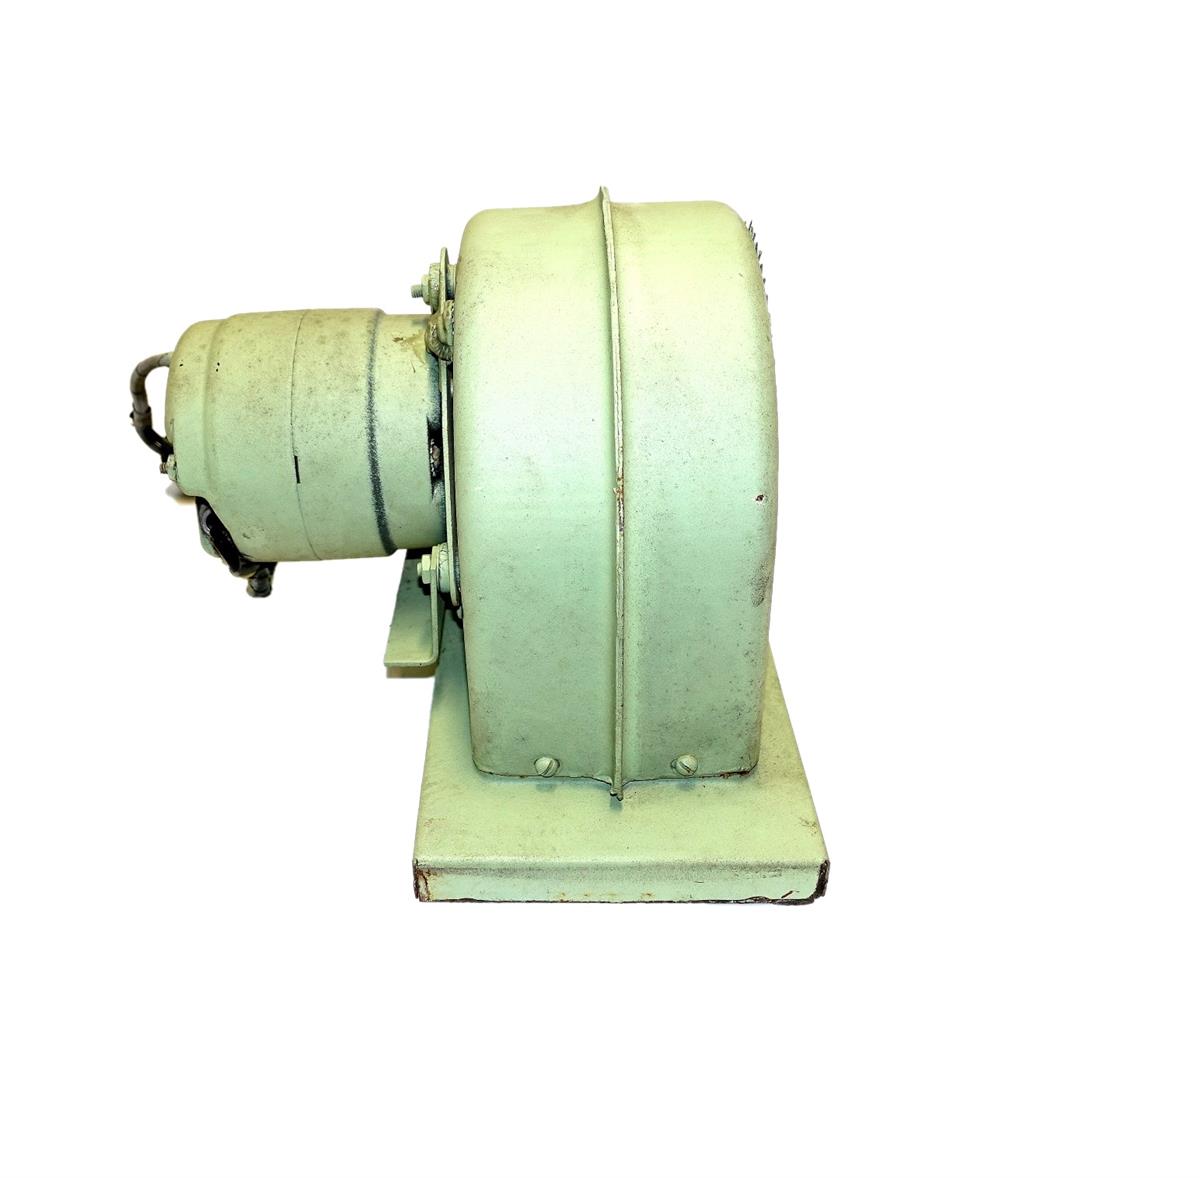 M35-707 | M35-707 Van Body Exhaust Blower Complete Assembly (7) (Large).JPG